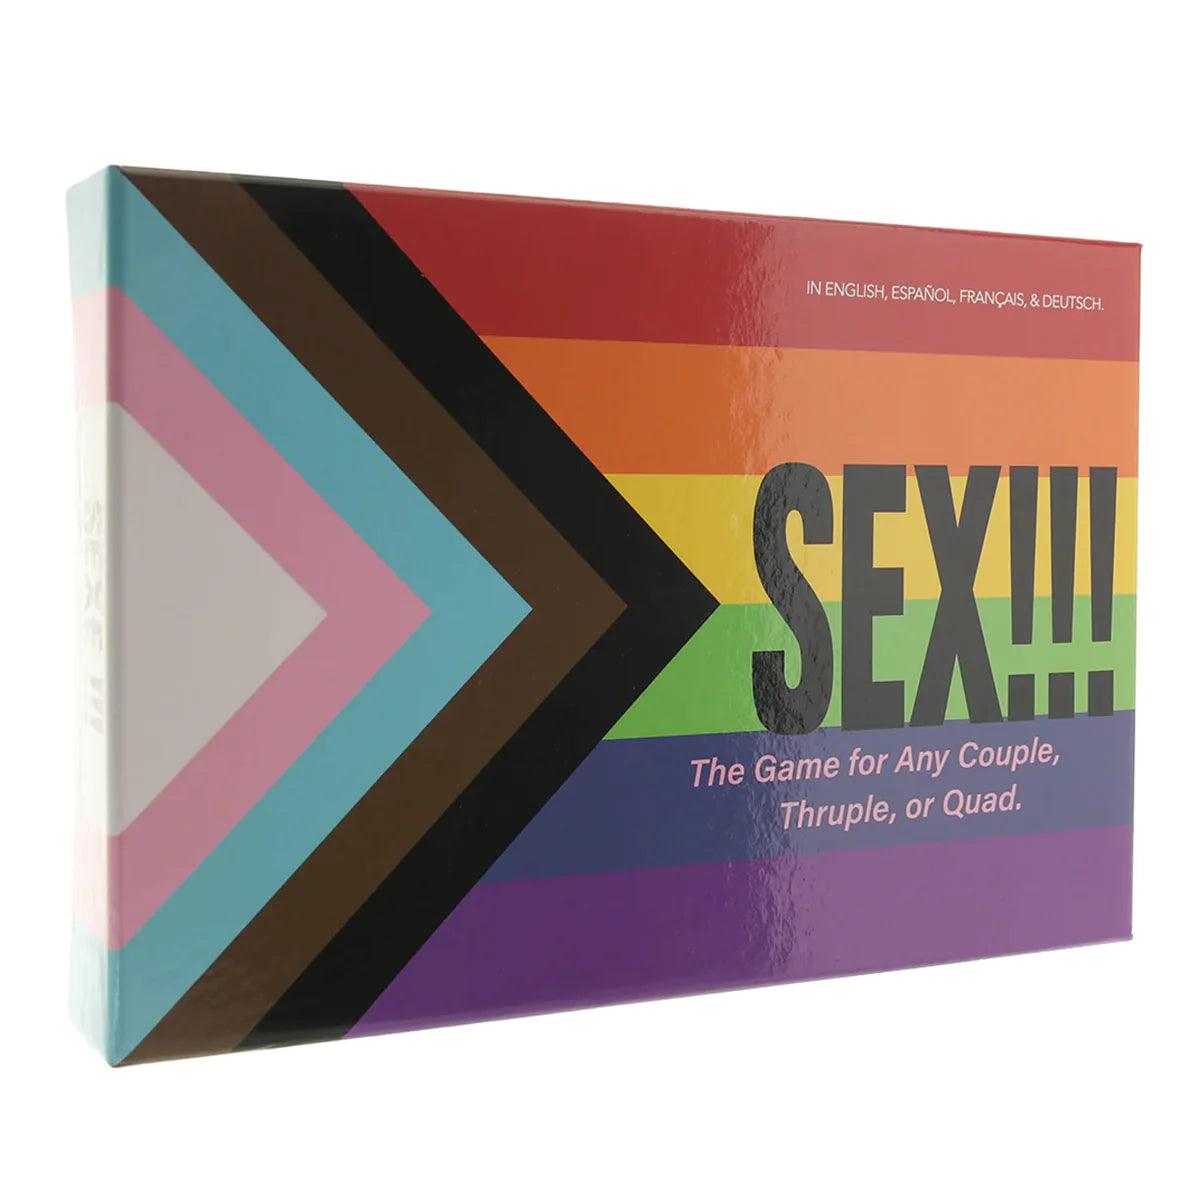 Sex!!! The Game for Any Couple - Passionfruit